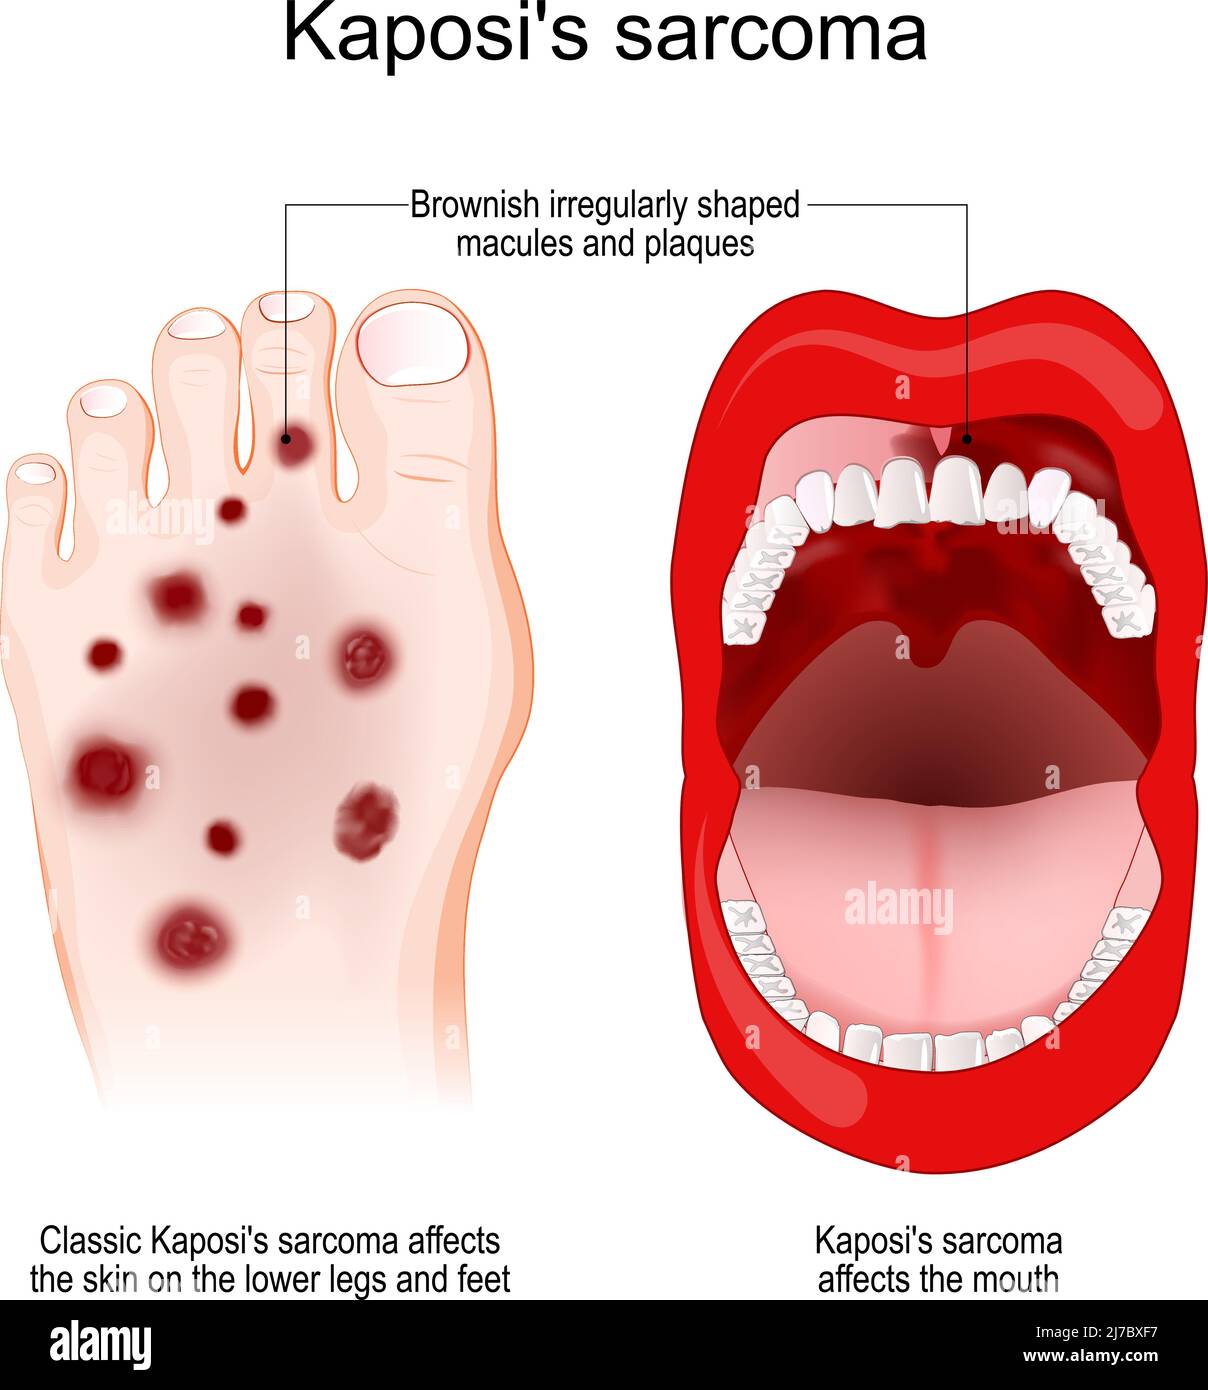 Kaposi's sarcoma is a rare type of cancer caused by infection by Human herpesvirus. Kaposi's sarcoma affects the mouth and foot. Symptom of Kaposi's s Stock Vector